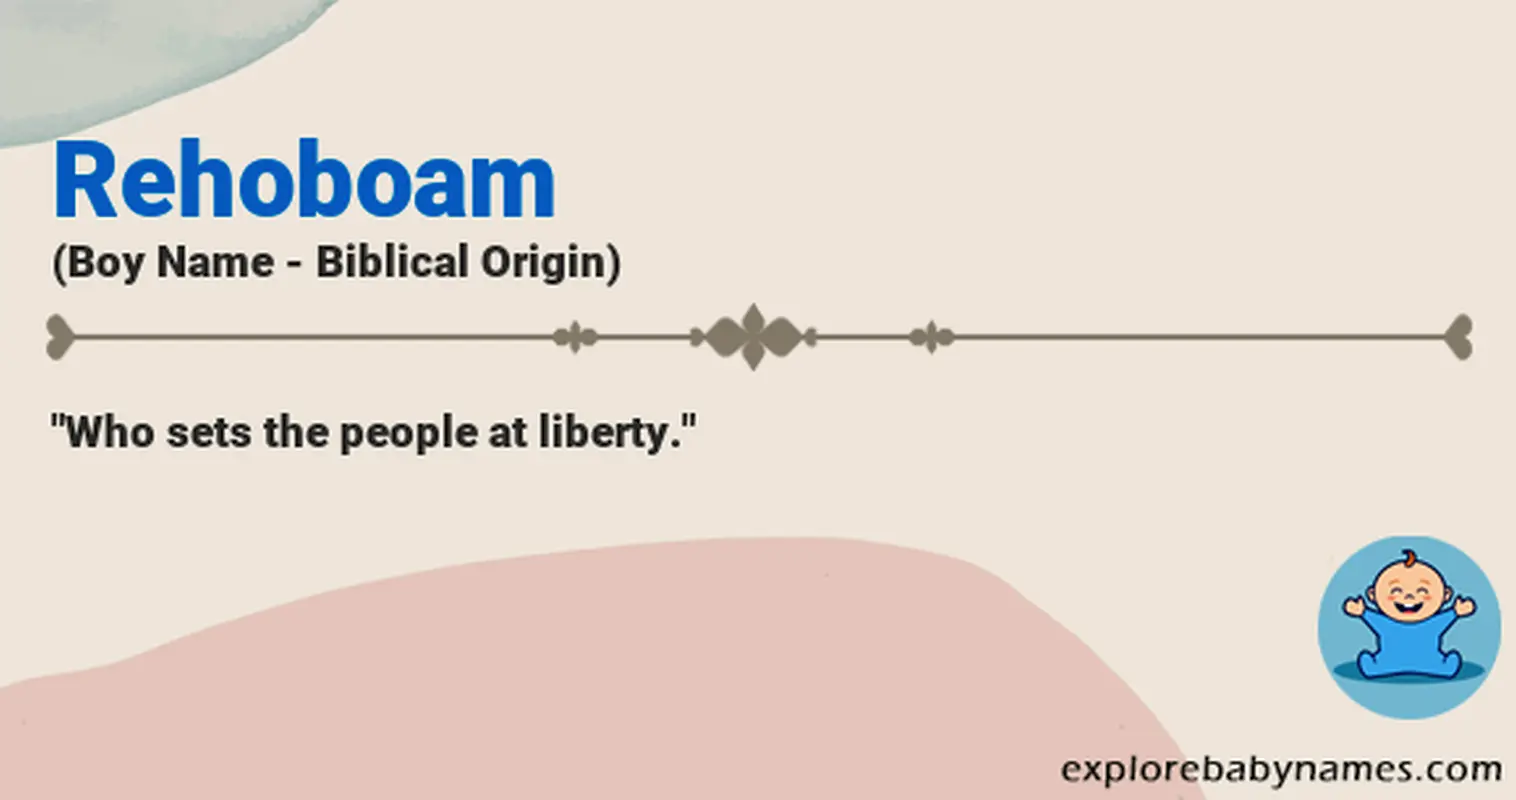 Meaning of Rehoboam